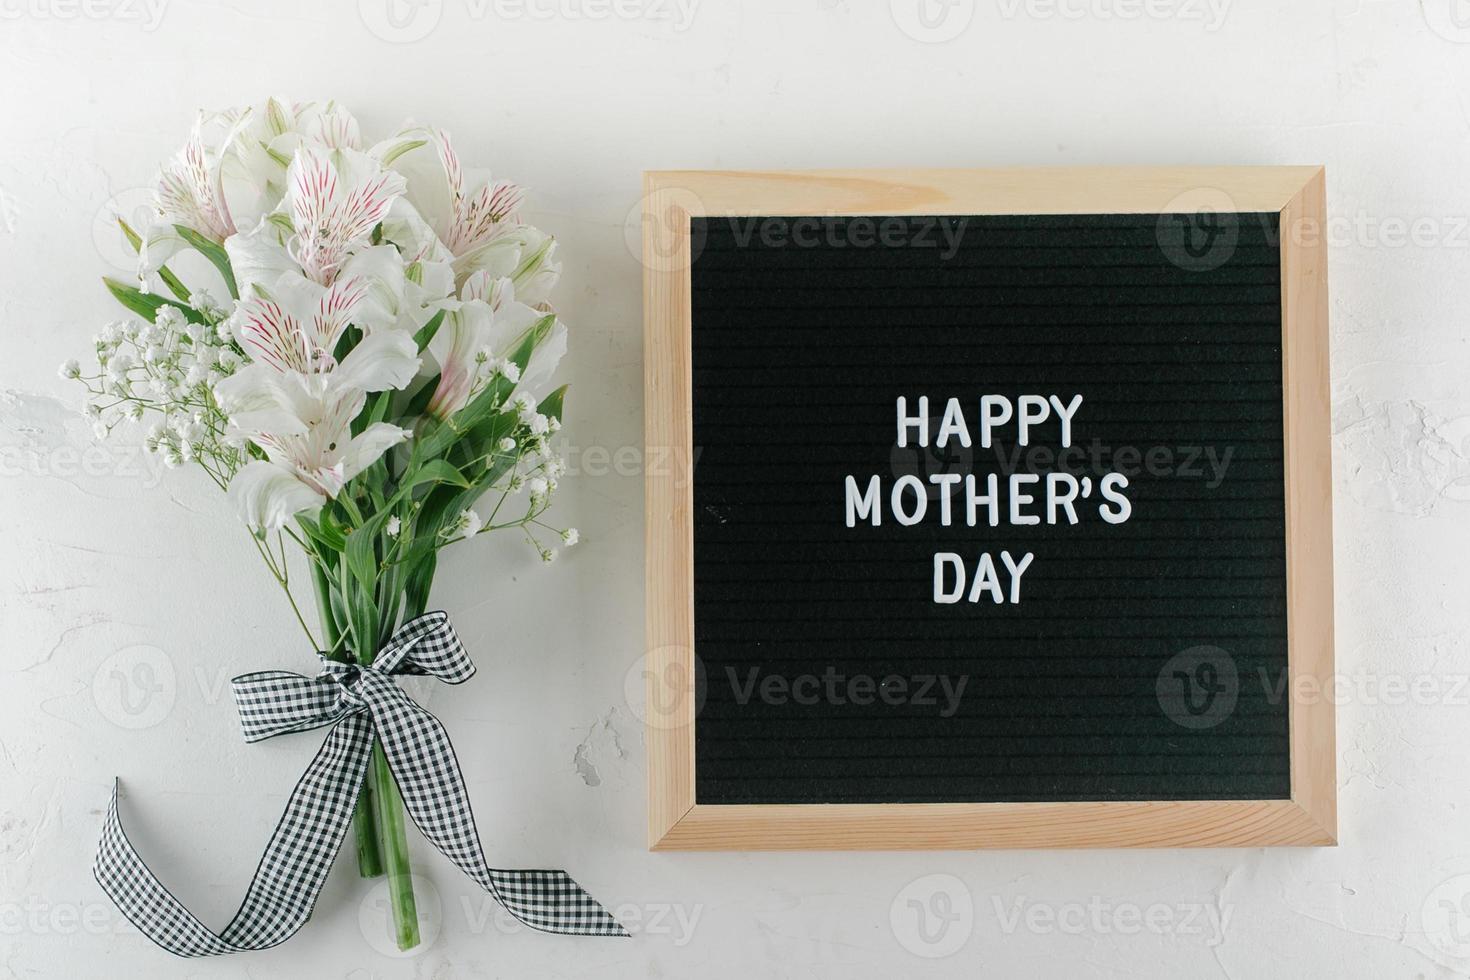 Mother's Day greetings card. Alstroemeria, gypsophila, letters board with text Happy Mothers Day photo